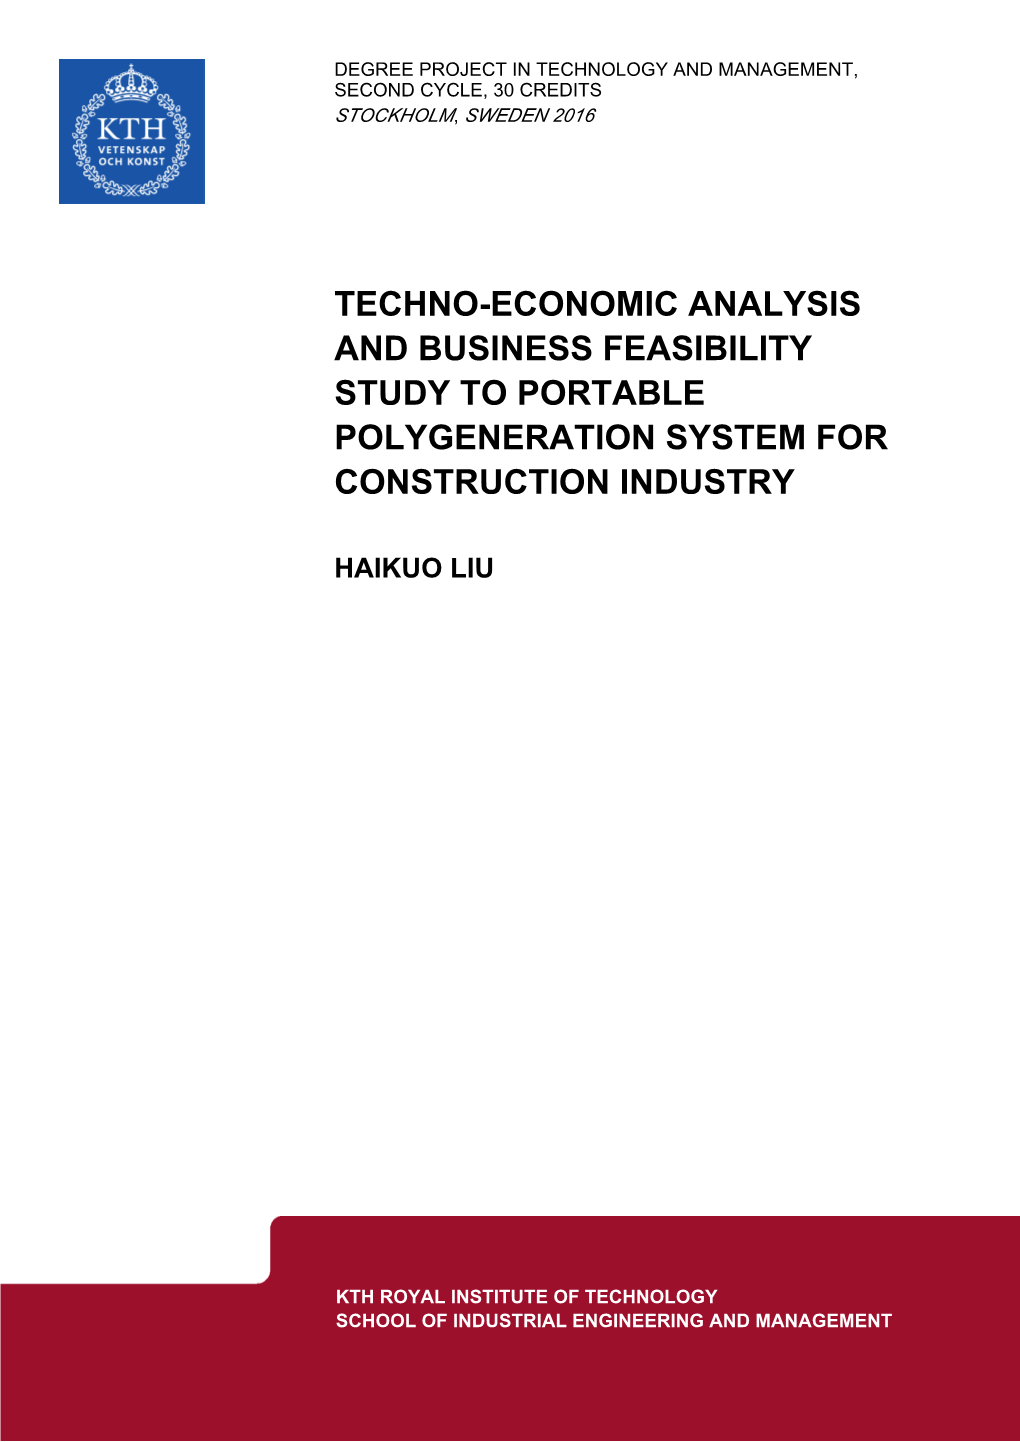 Techno-Economic Analysis and Business Feasibility Study to Portable Polygeneration System for Construction Industry